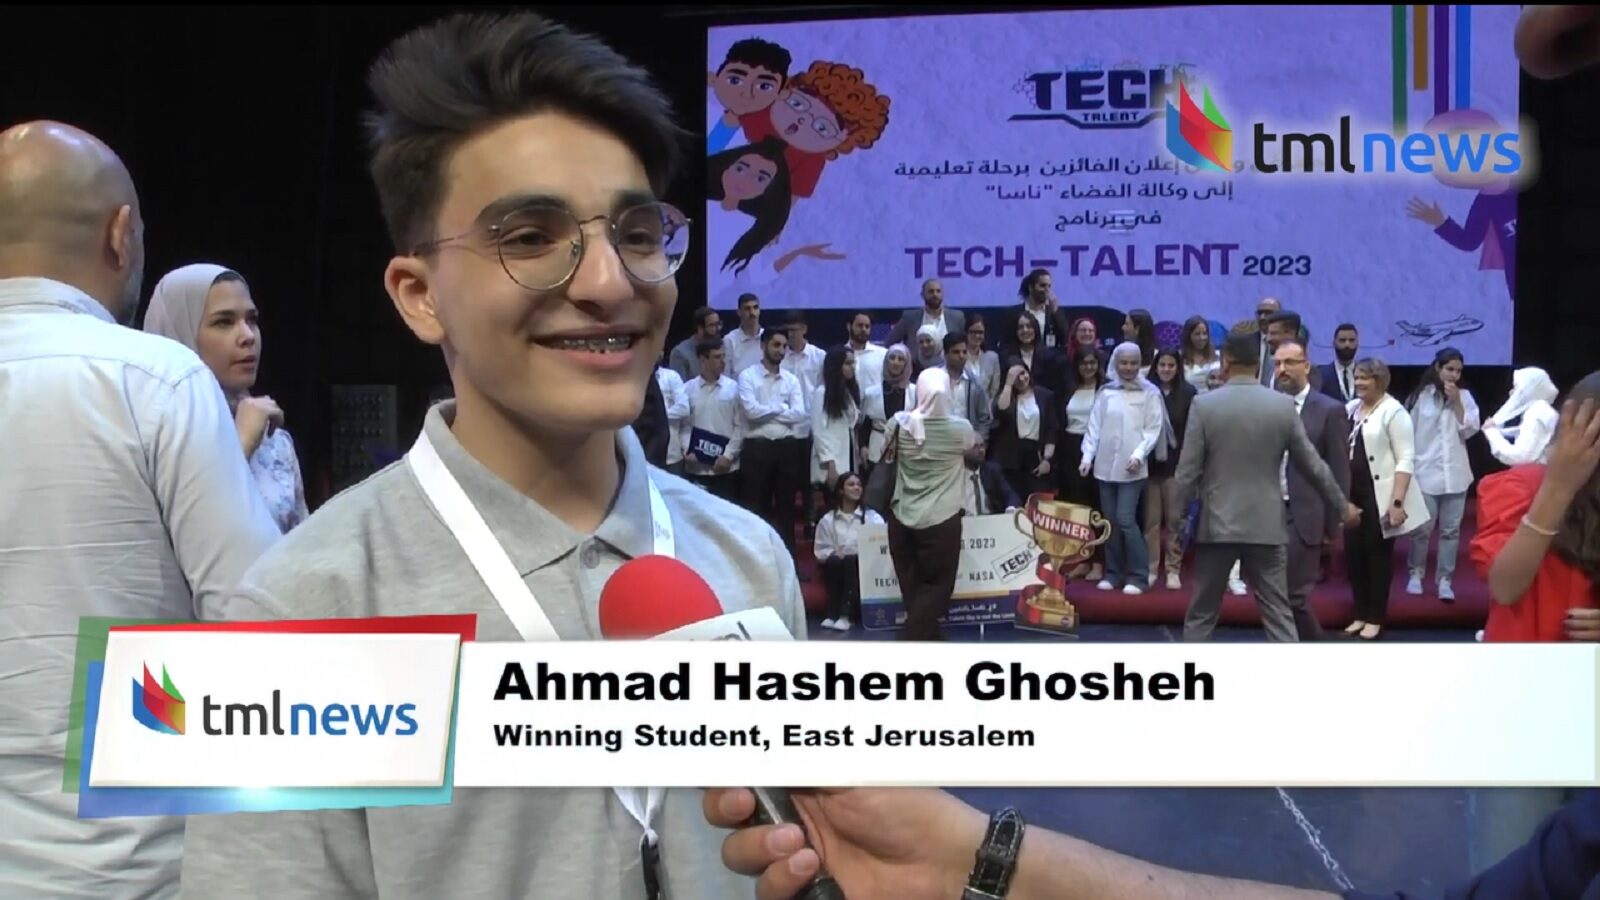 Palestinian Students Win Trip to NASA in Tech Talent Competition